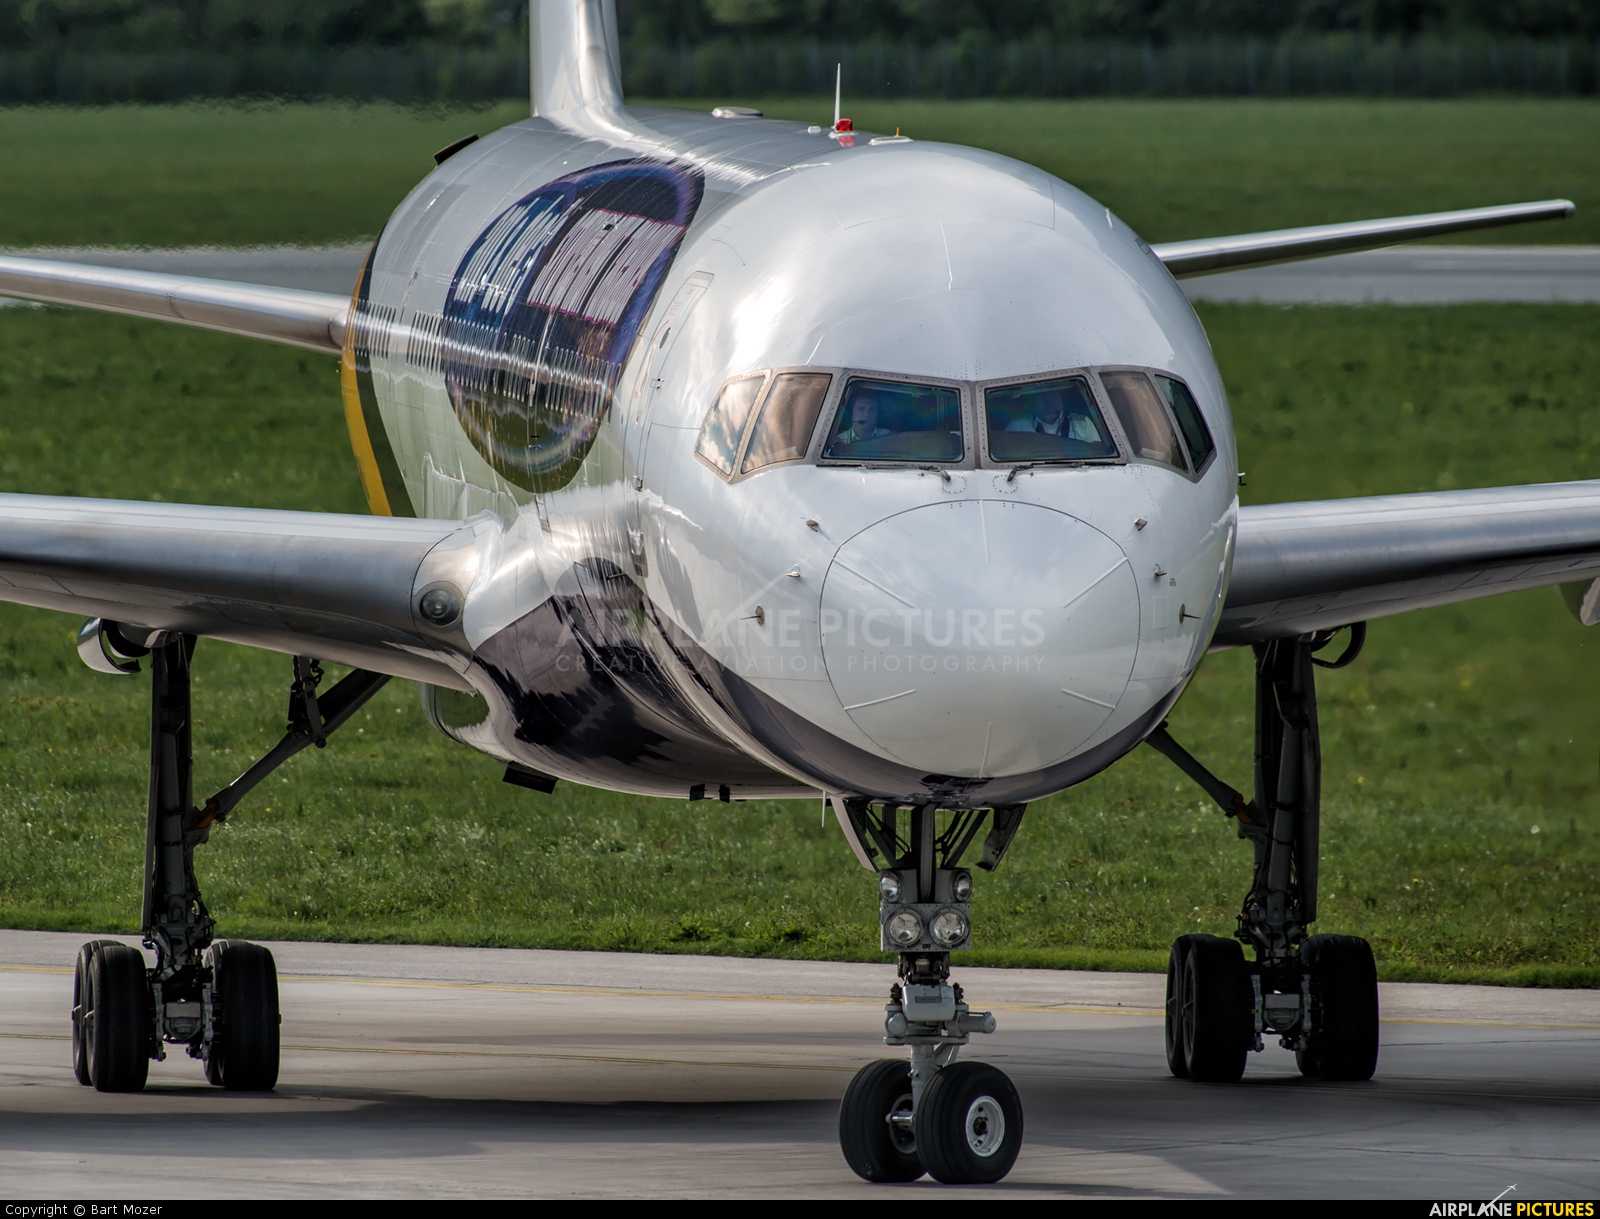 Monarch Airlines G-MONJ aircraft at Innsbruck